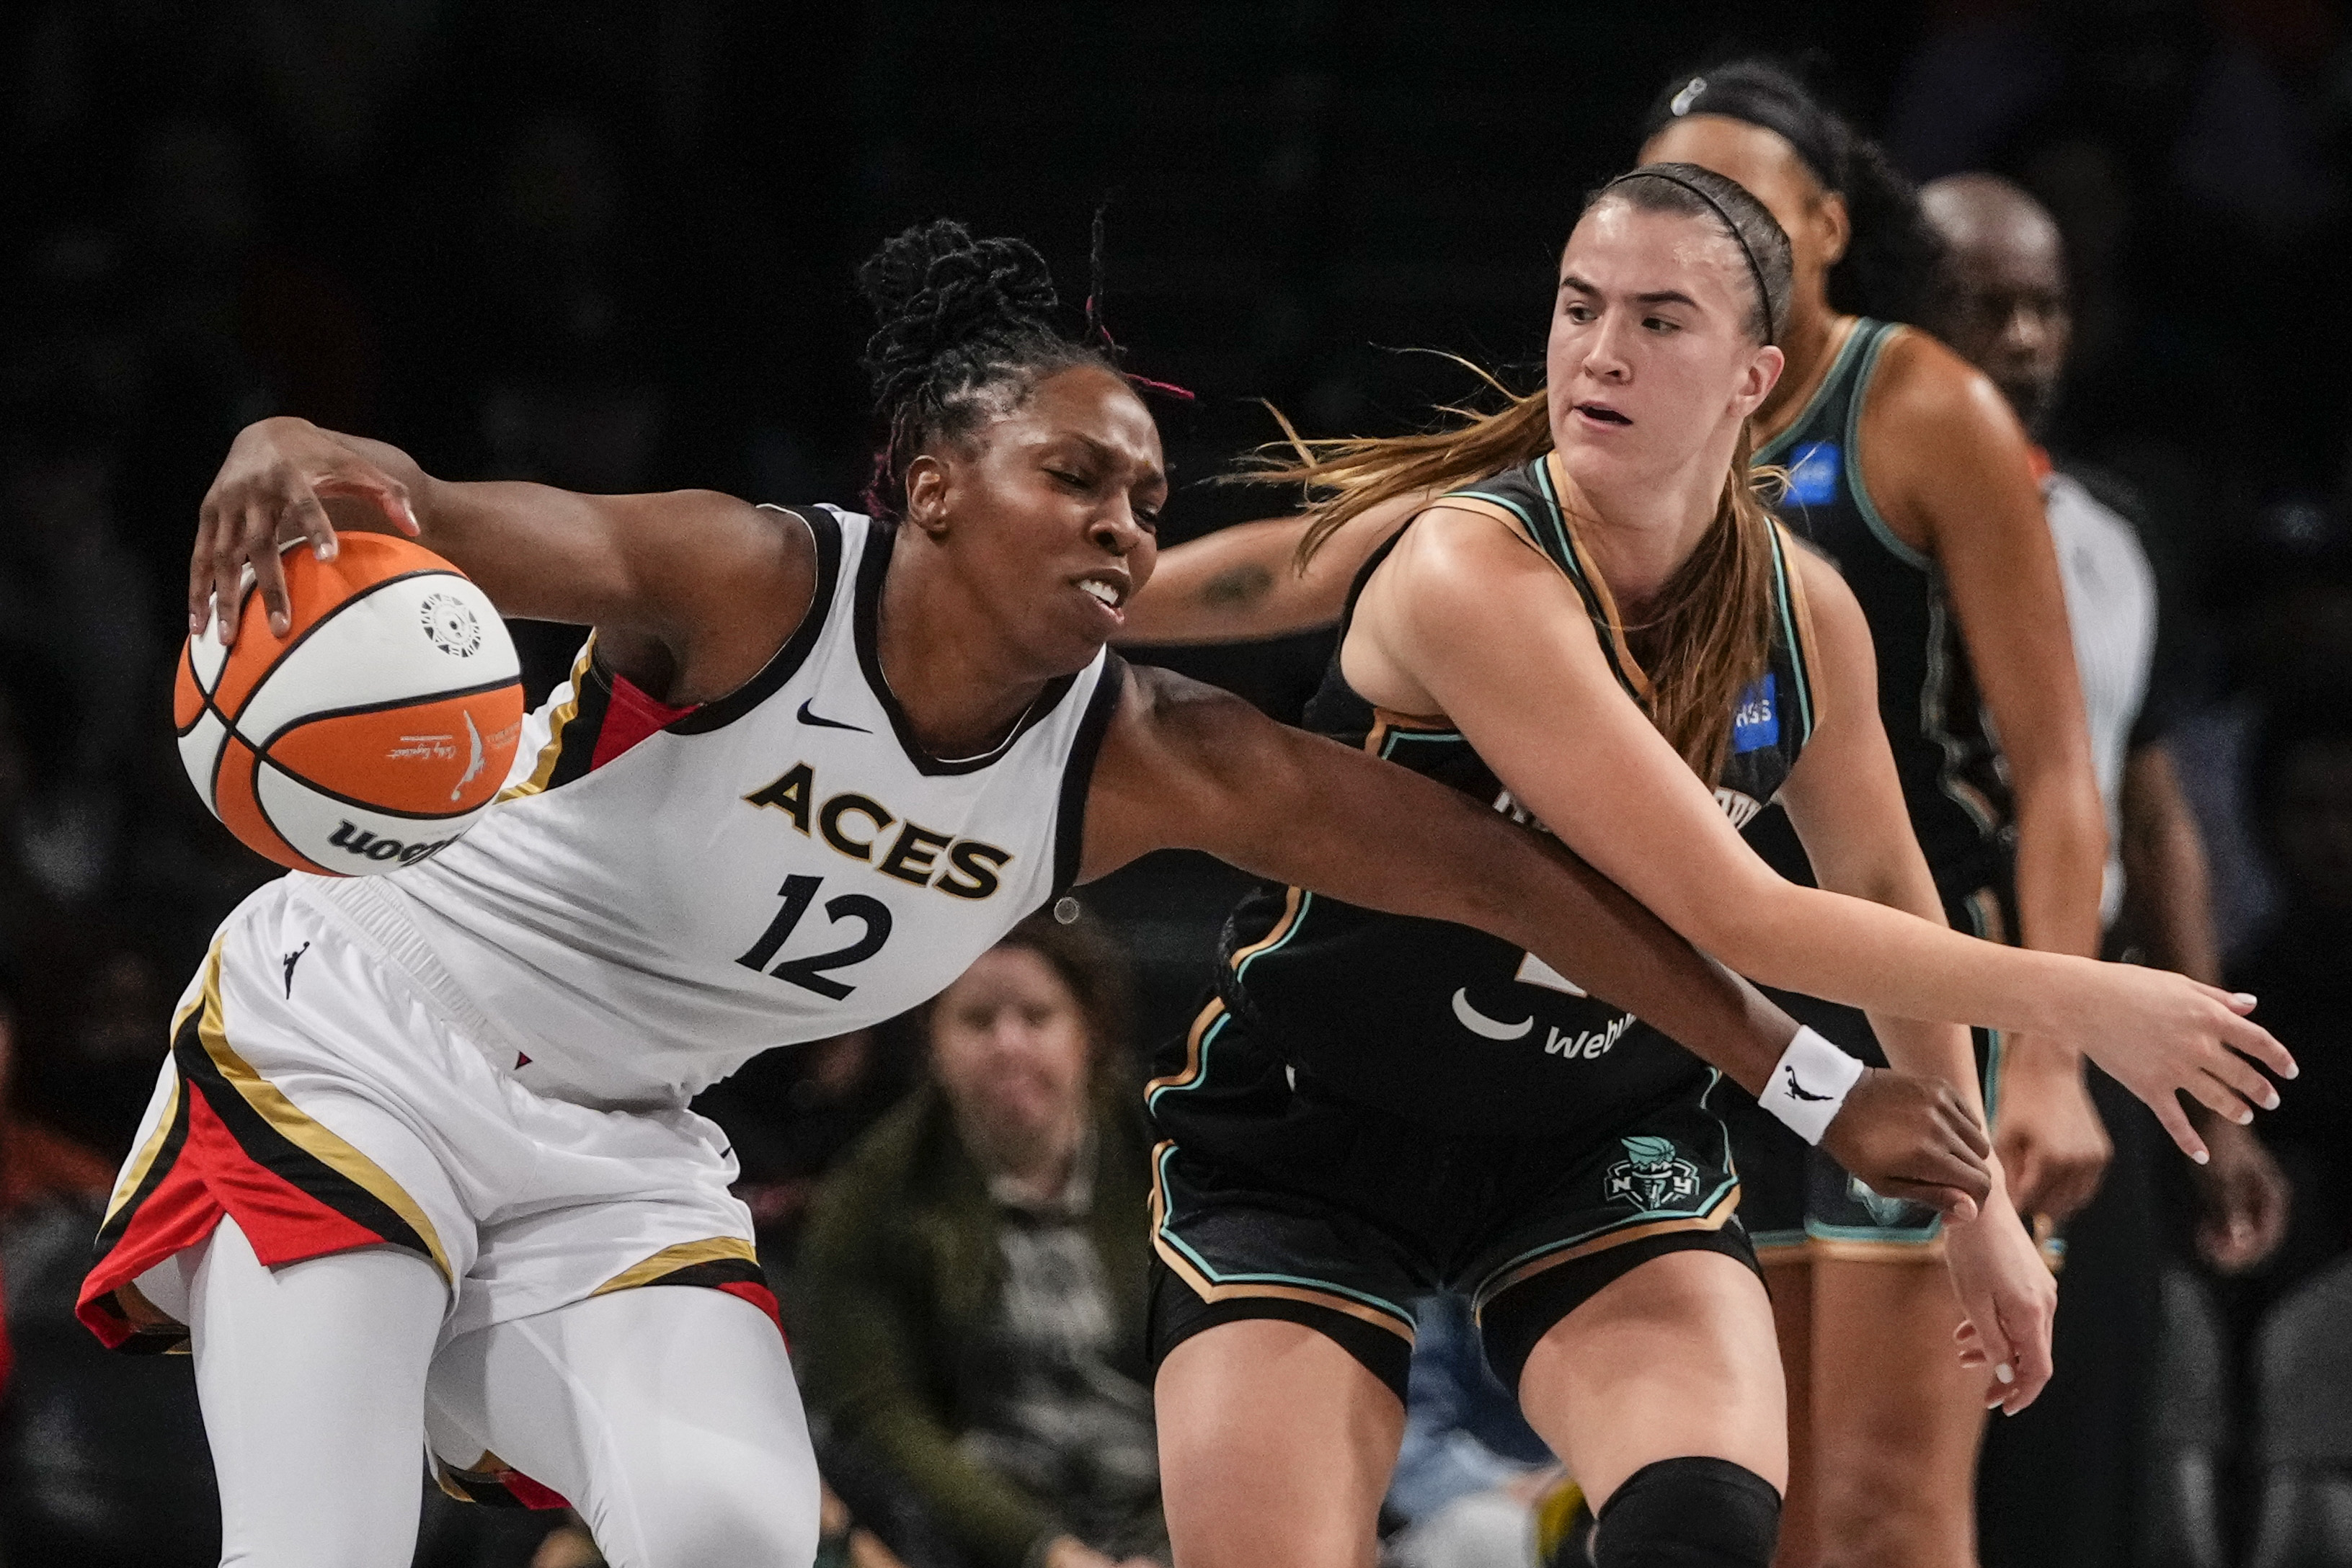 Home cooking: Jones, Stewart lead Liberty past Aces to avoid WNBA